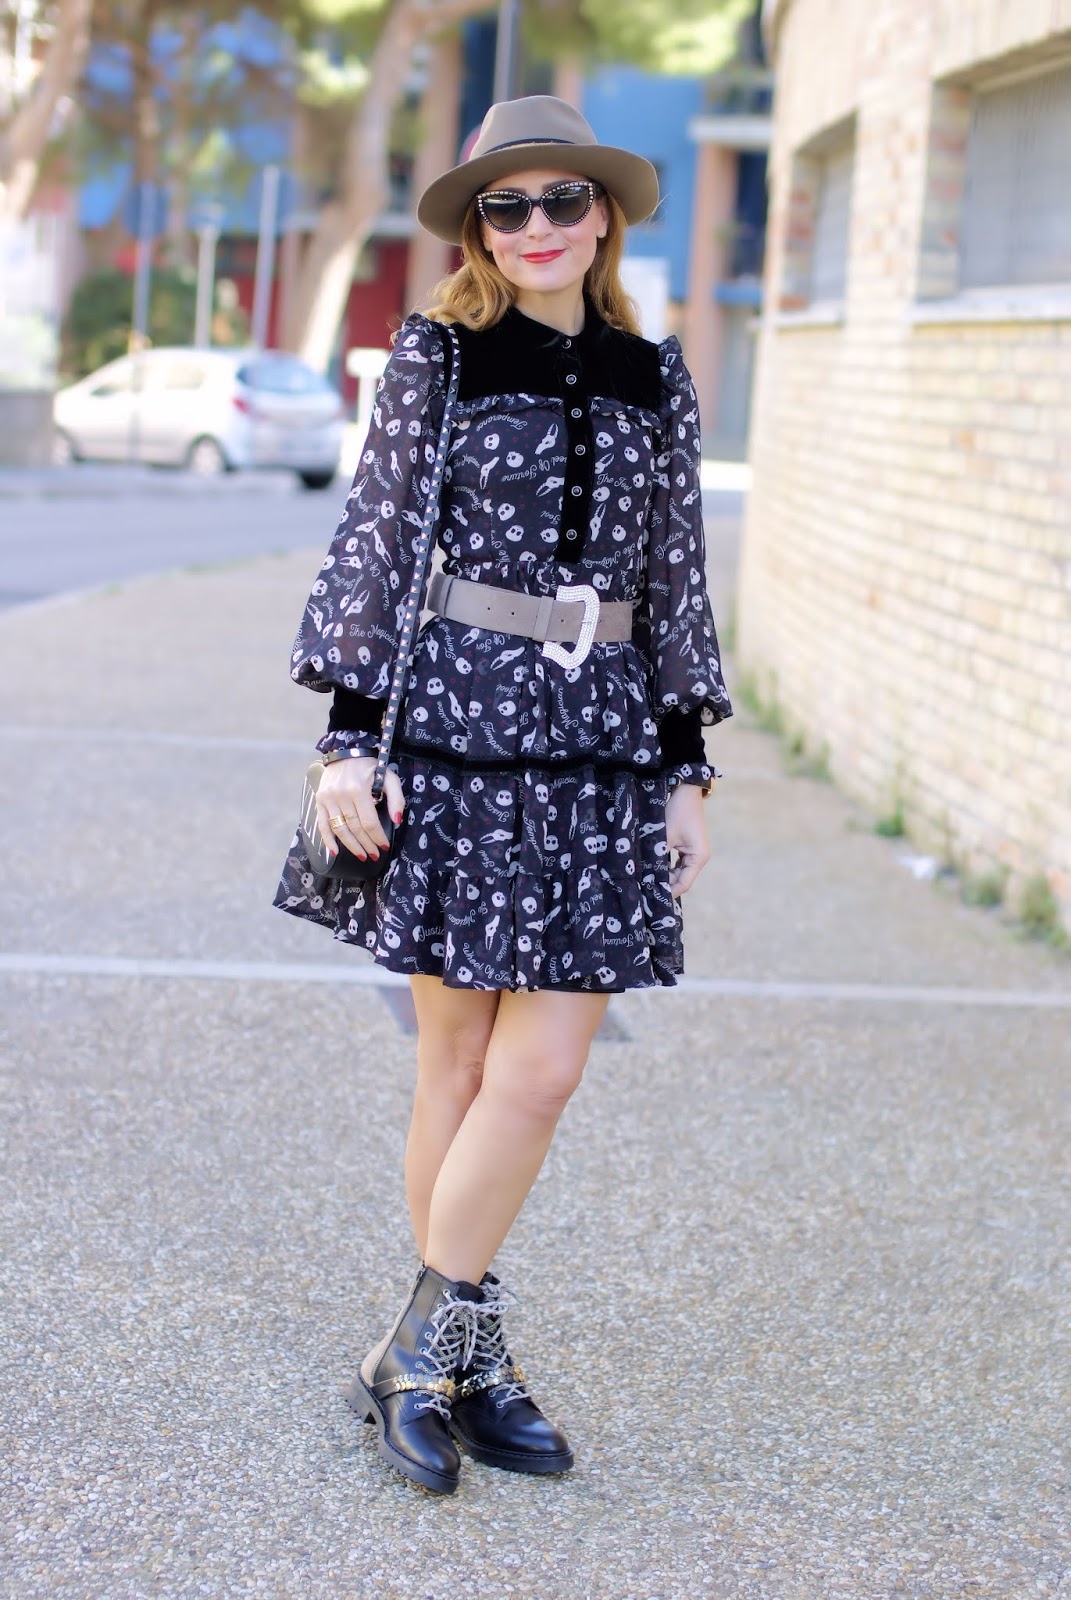 Halloween outfit idea: skull print dress from Maggie Sweet on Fashion and Cookies fashion blog, fashion blogger style